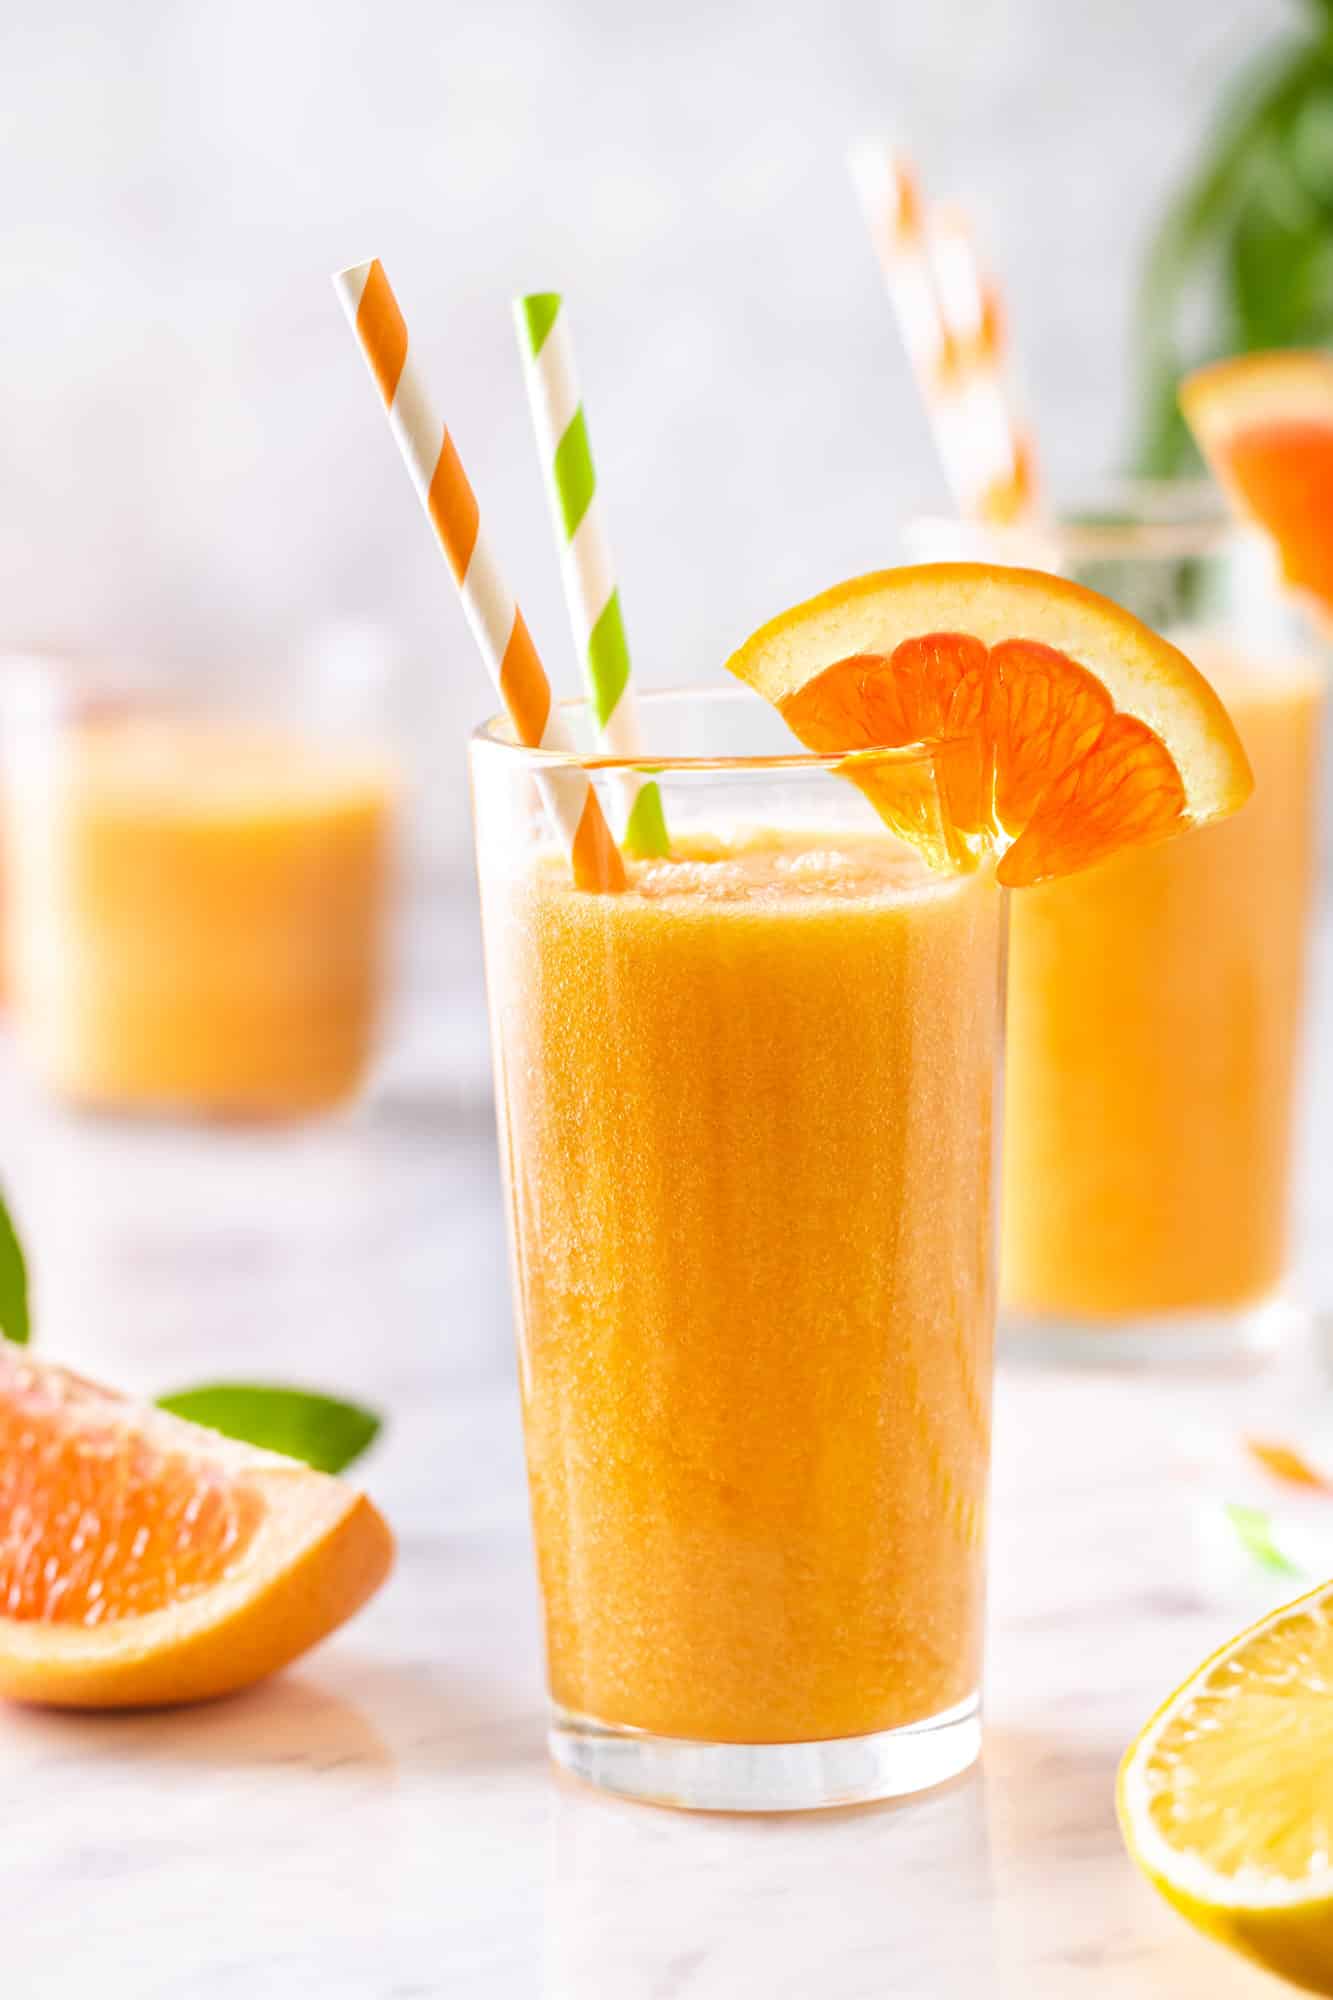 Citrus smoothie in a glass with an orange wedge on the rim and two straws.